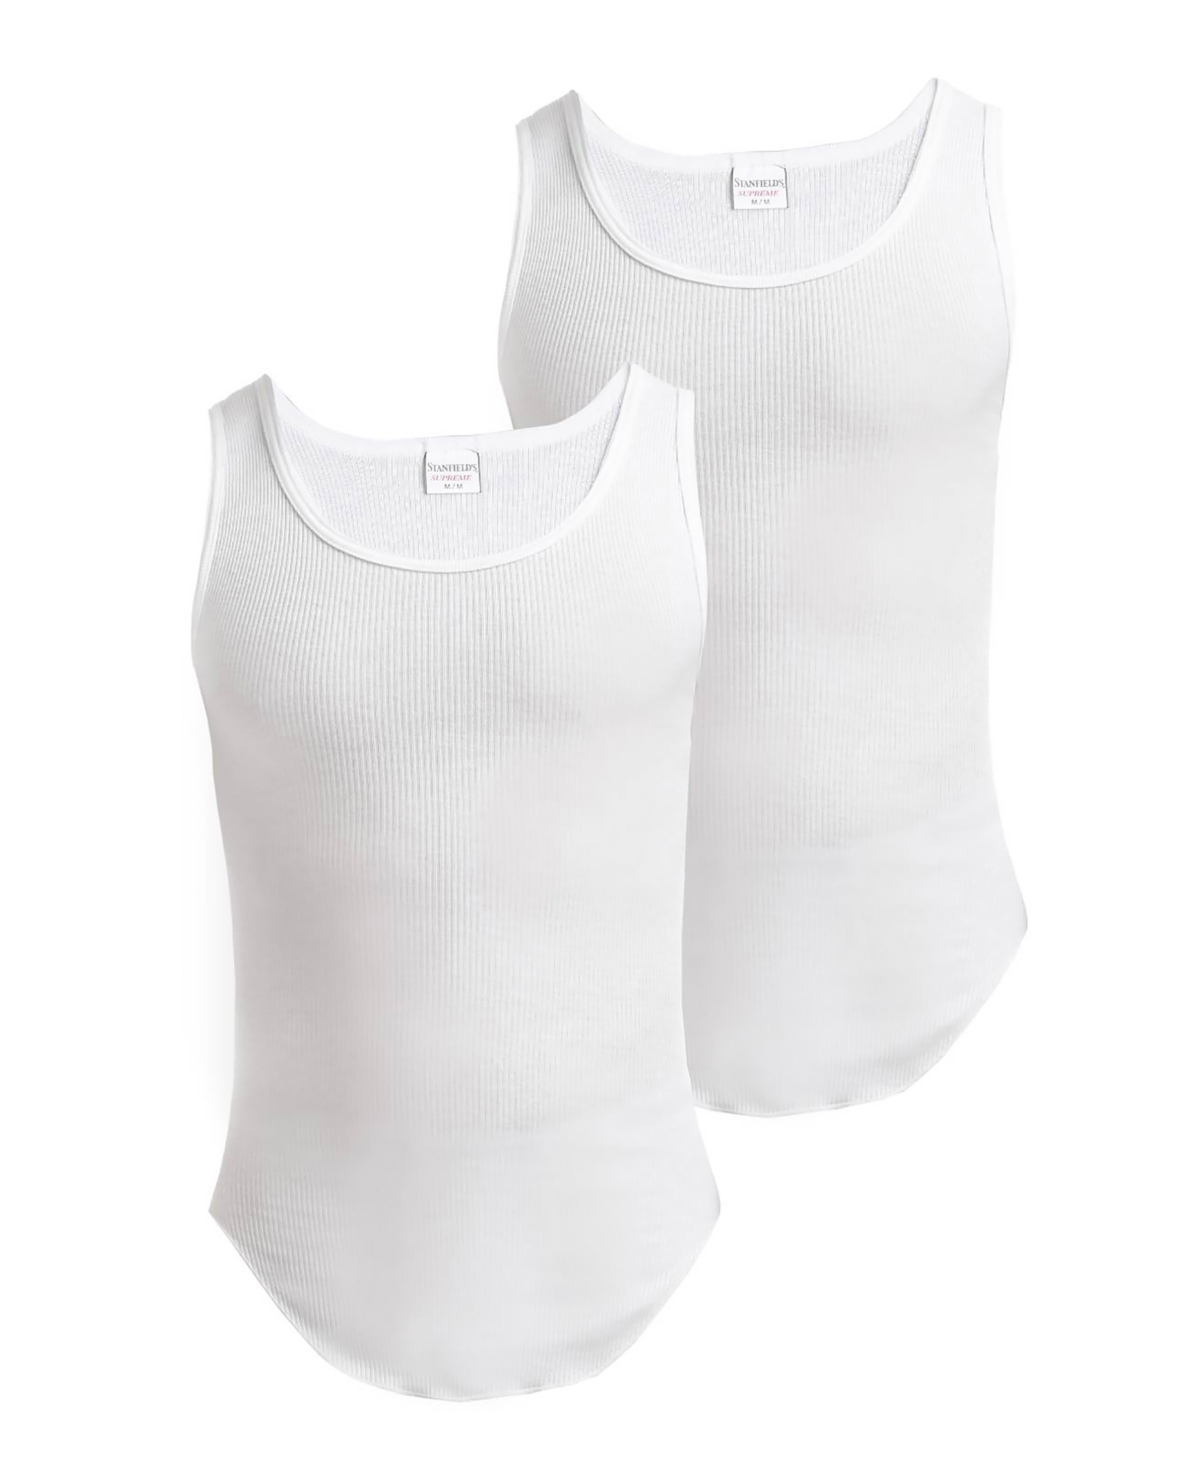 Stanfield's Men's Supreme Cotton Blend Tank Undershirts, Pack Of 2 In White